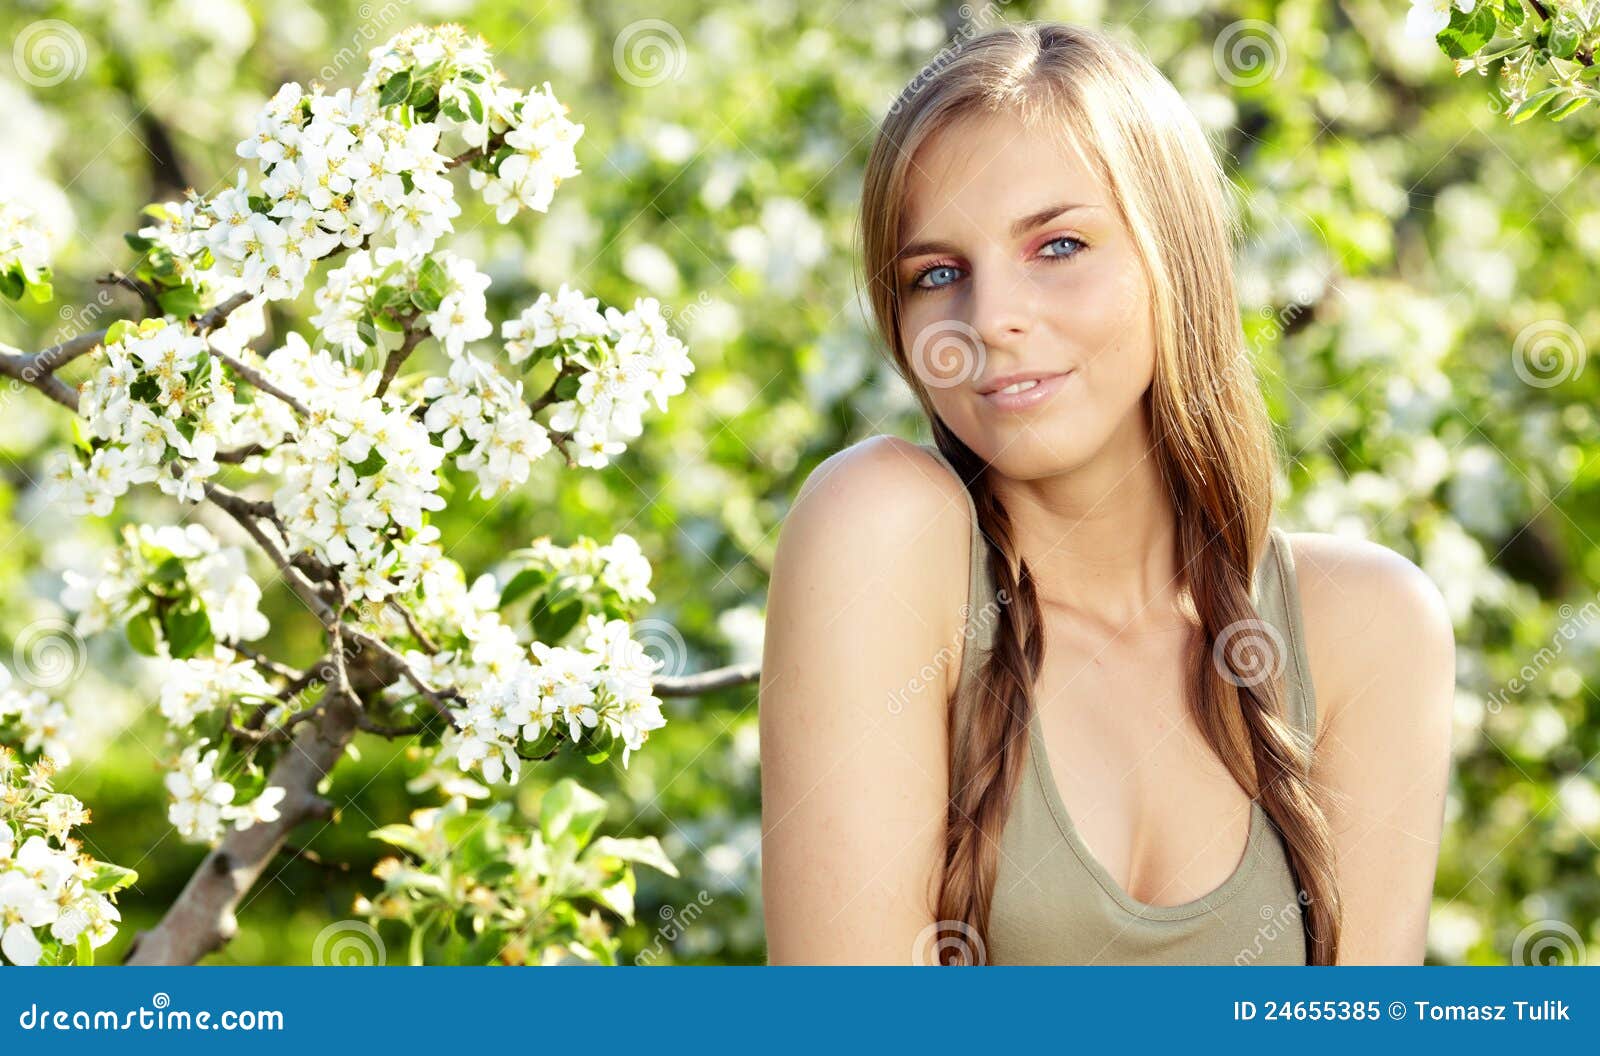 Spring woman stock image. Image of attractive, makeup - 24655385